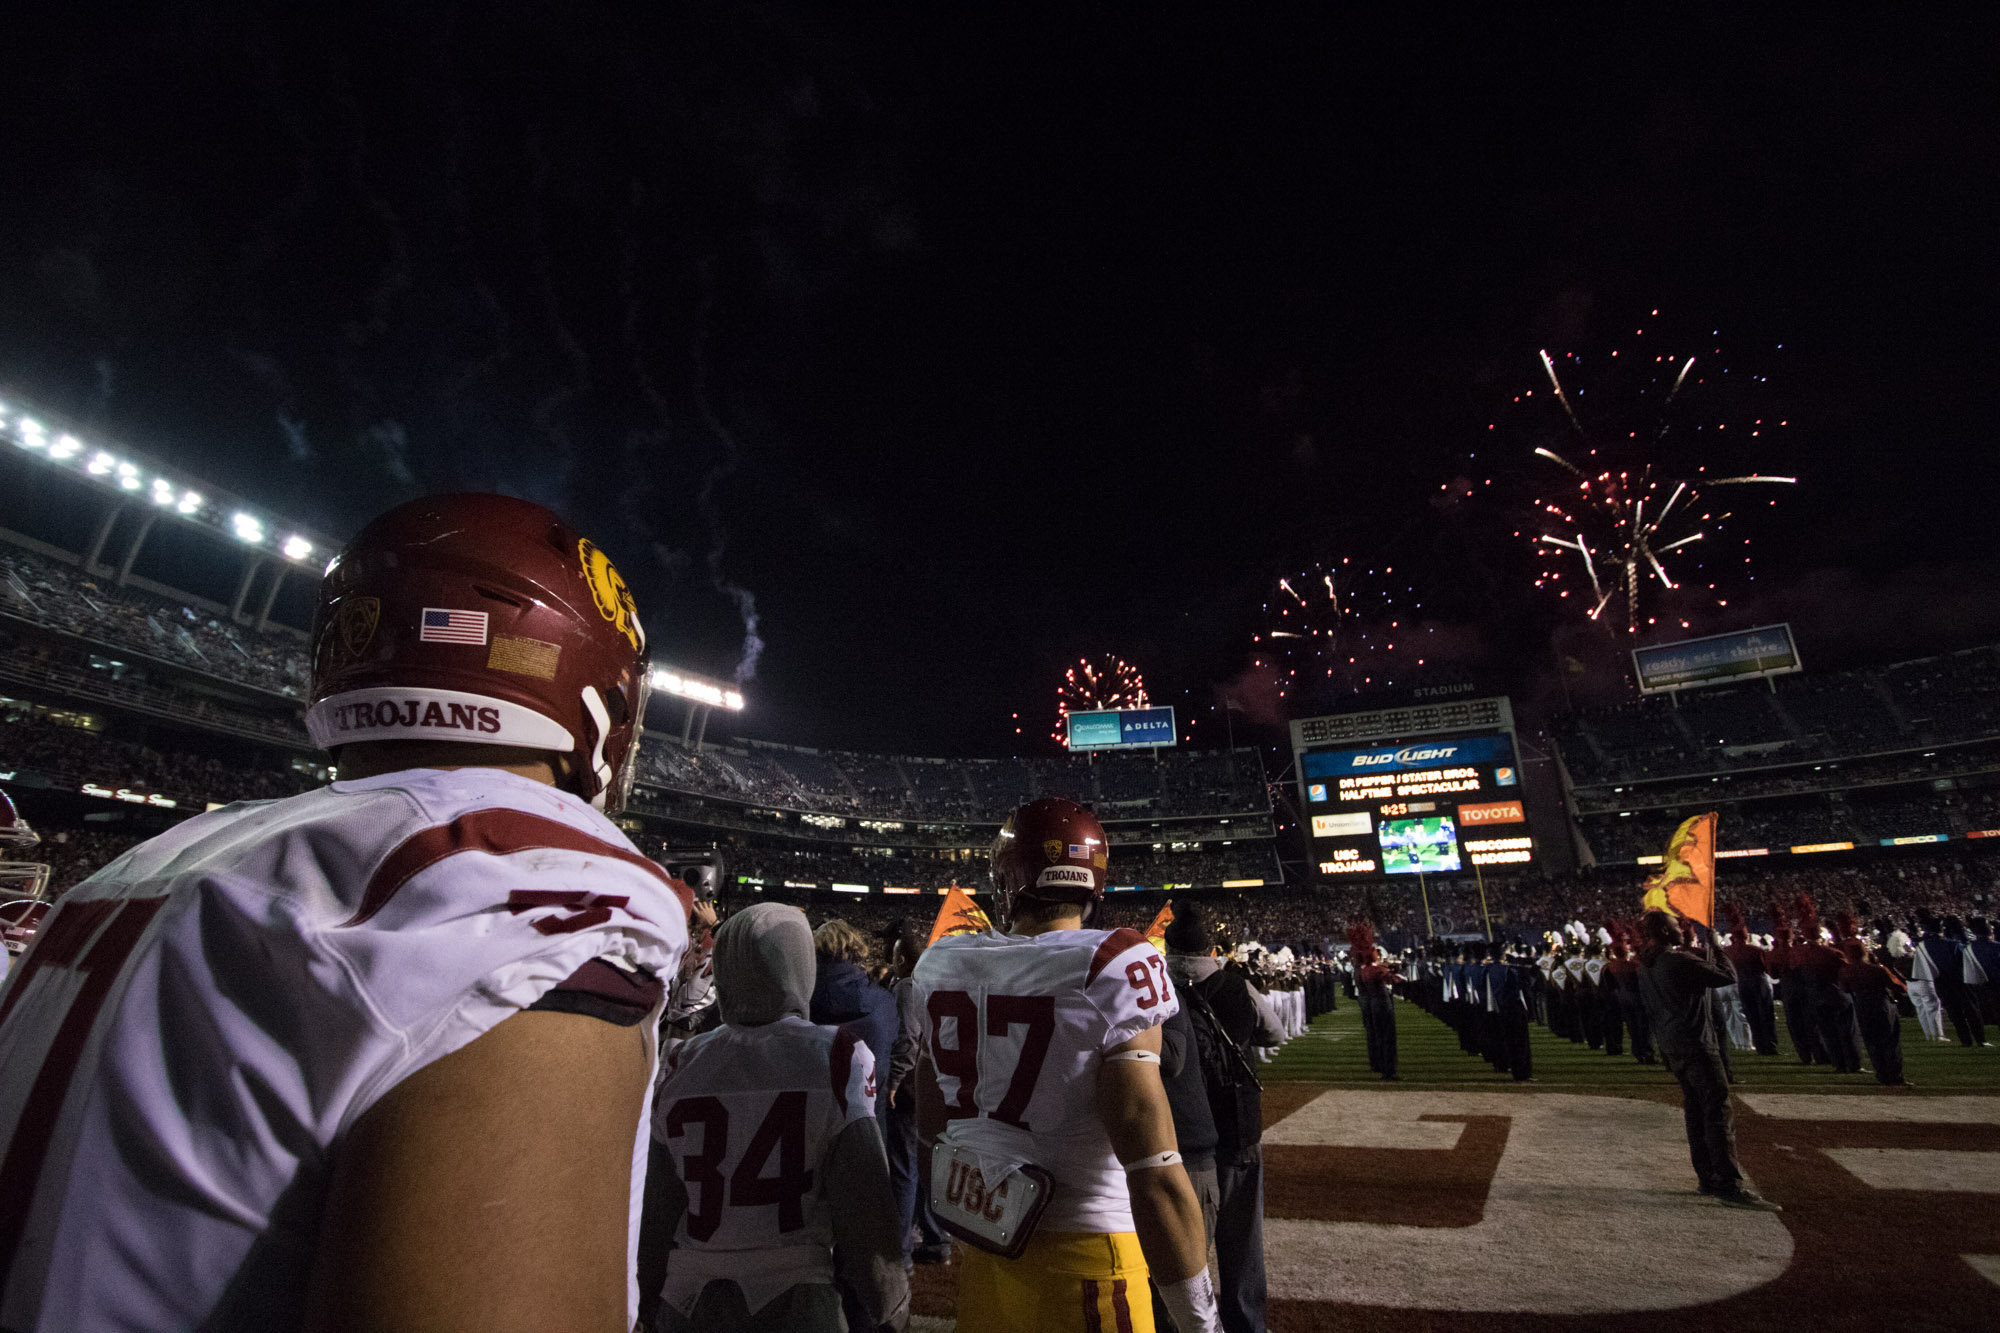 USC players walk out of the tunnel at the end of halftime to fireworks and a performance by a group of high school bands. Nick Entin | Daily Trojan